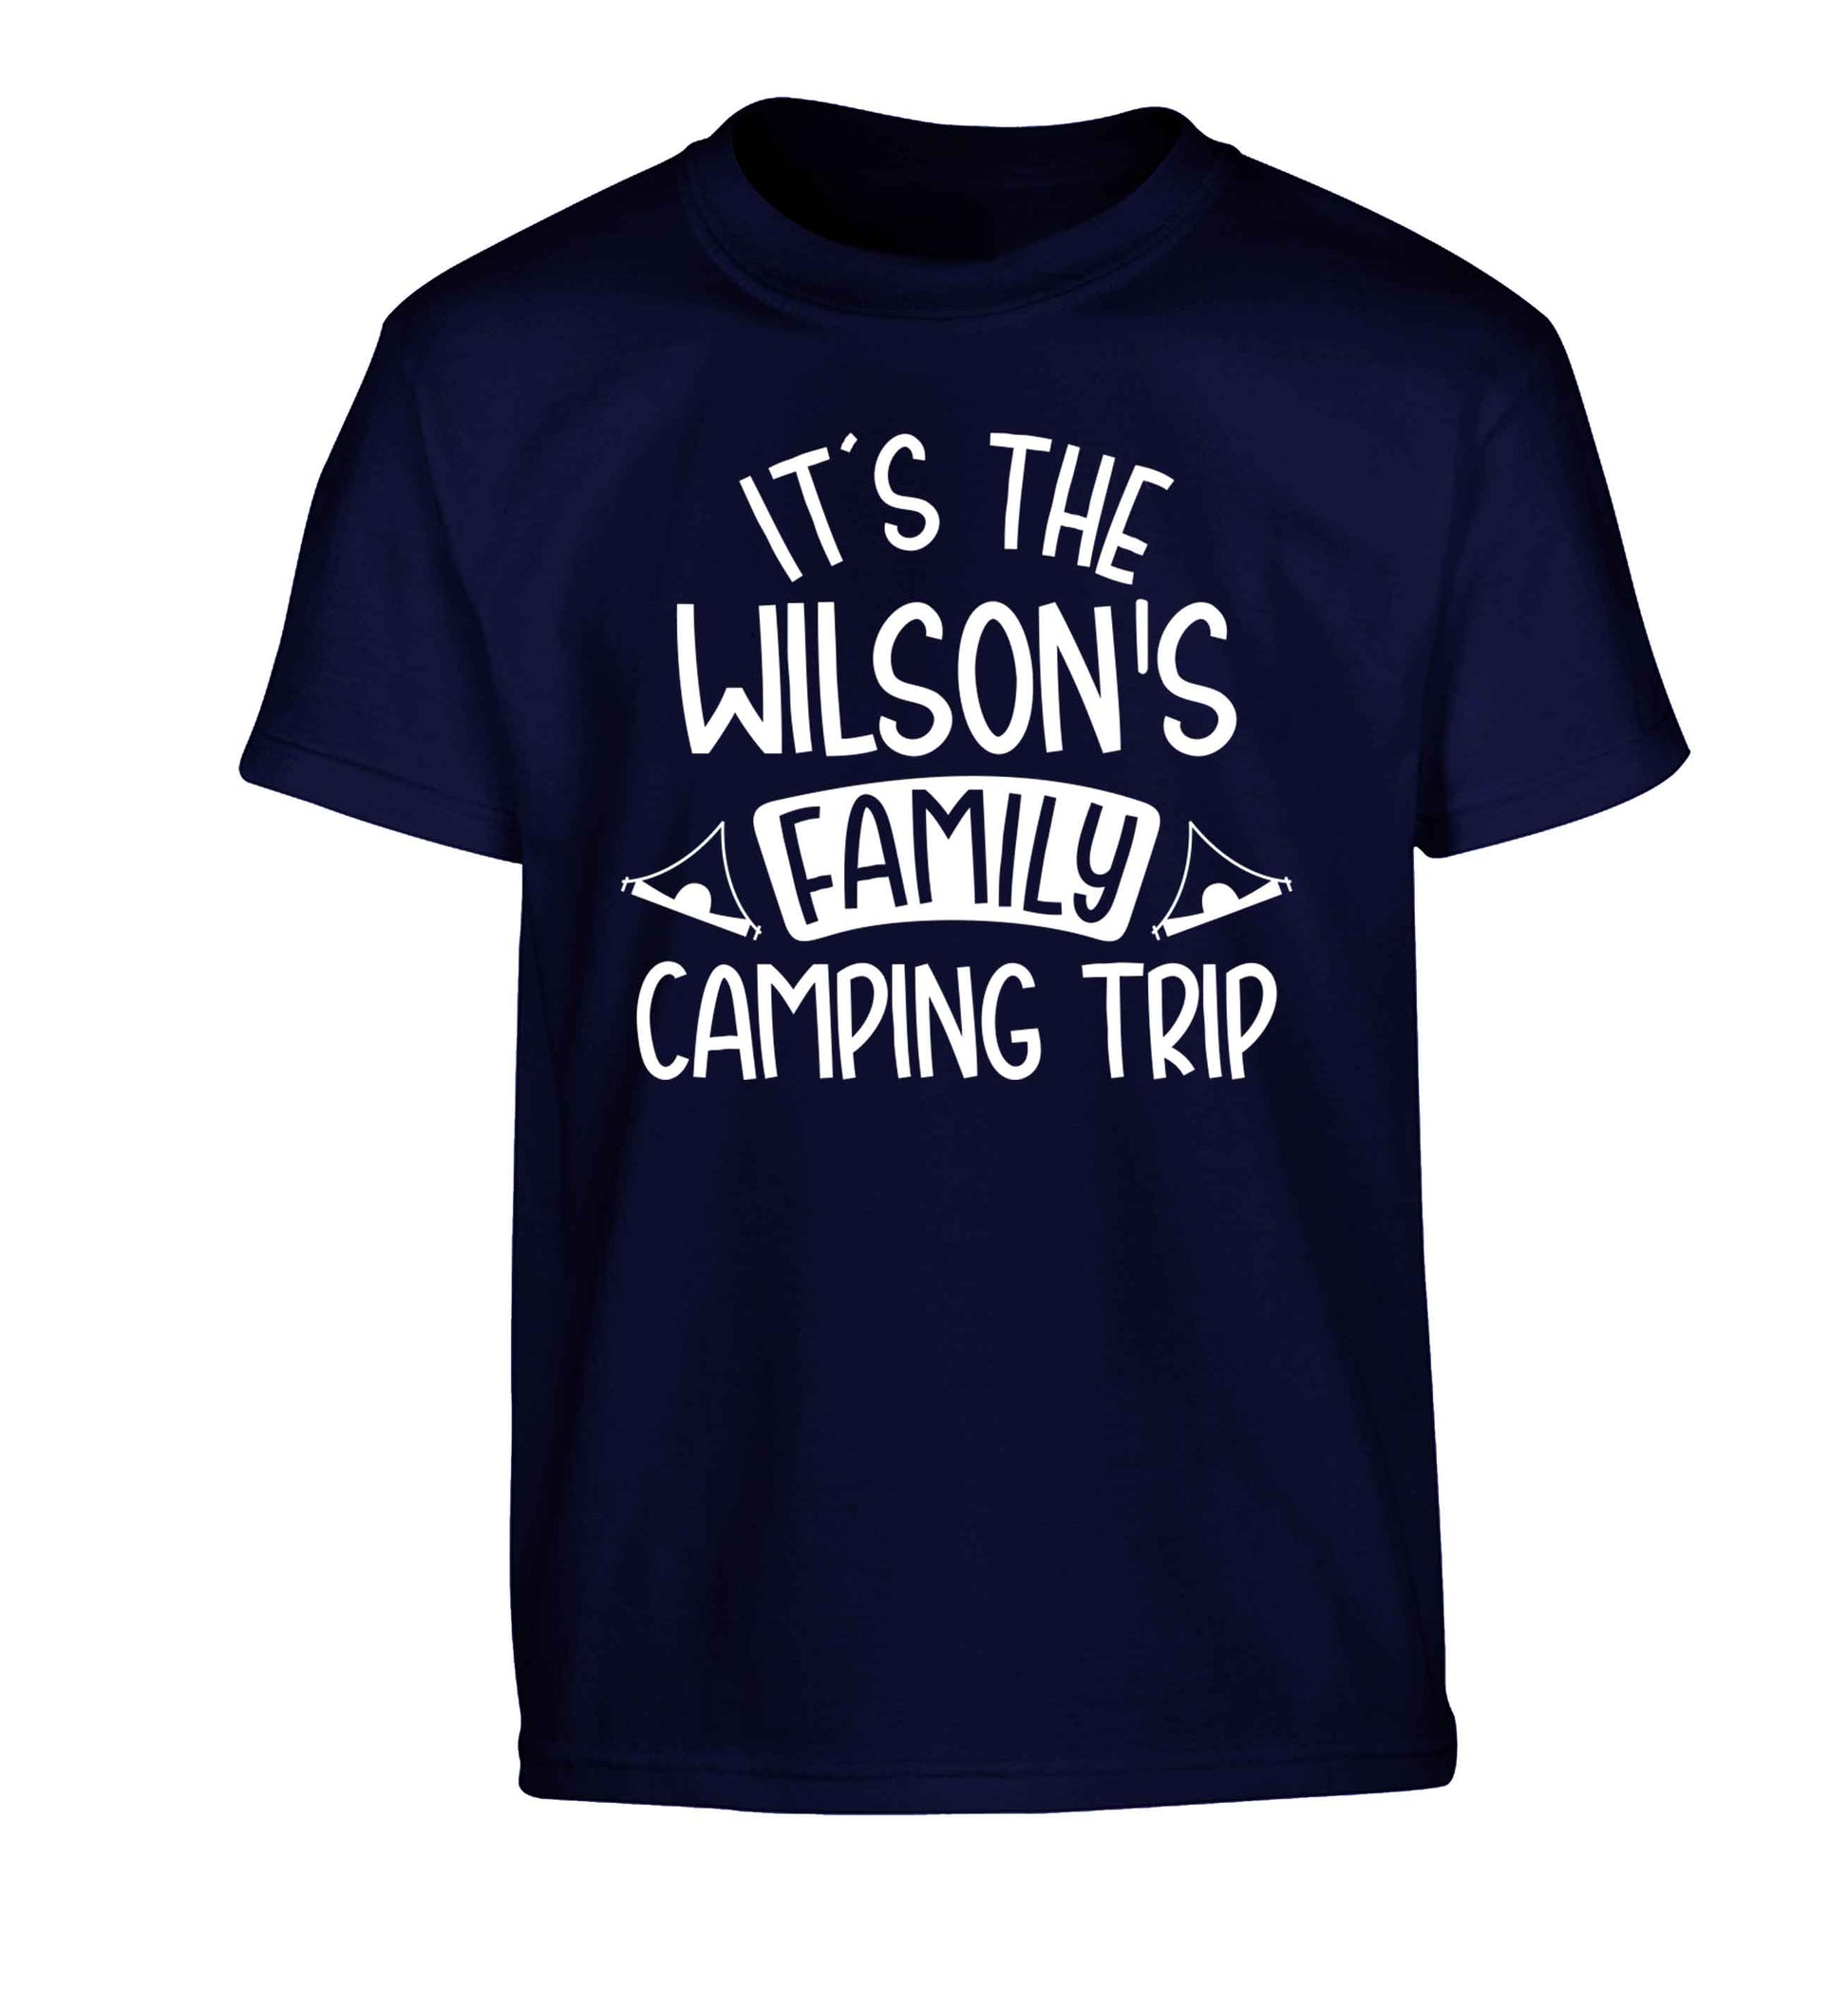 It's the Wilson's family camping trip personalised Children's navy Tshirt 12-13 Years